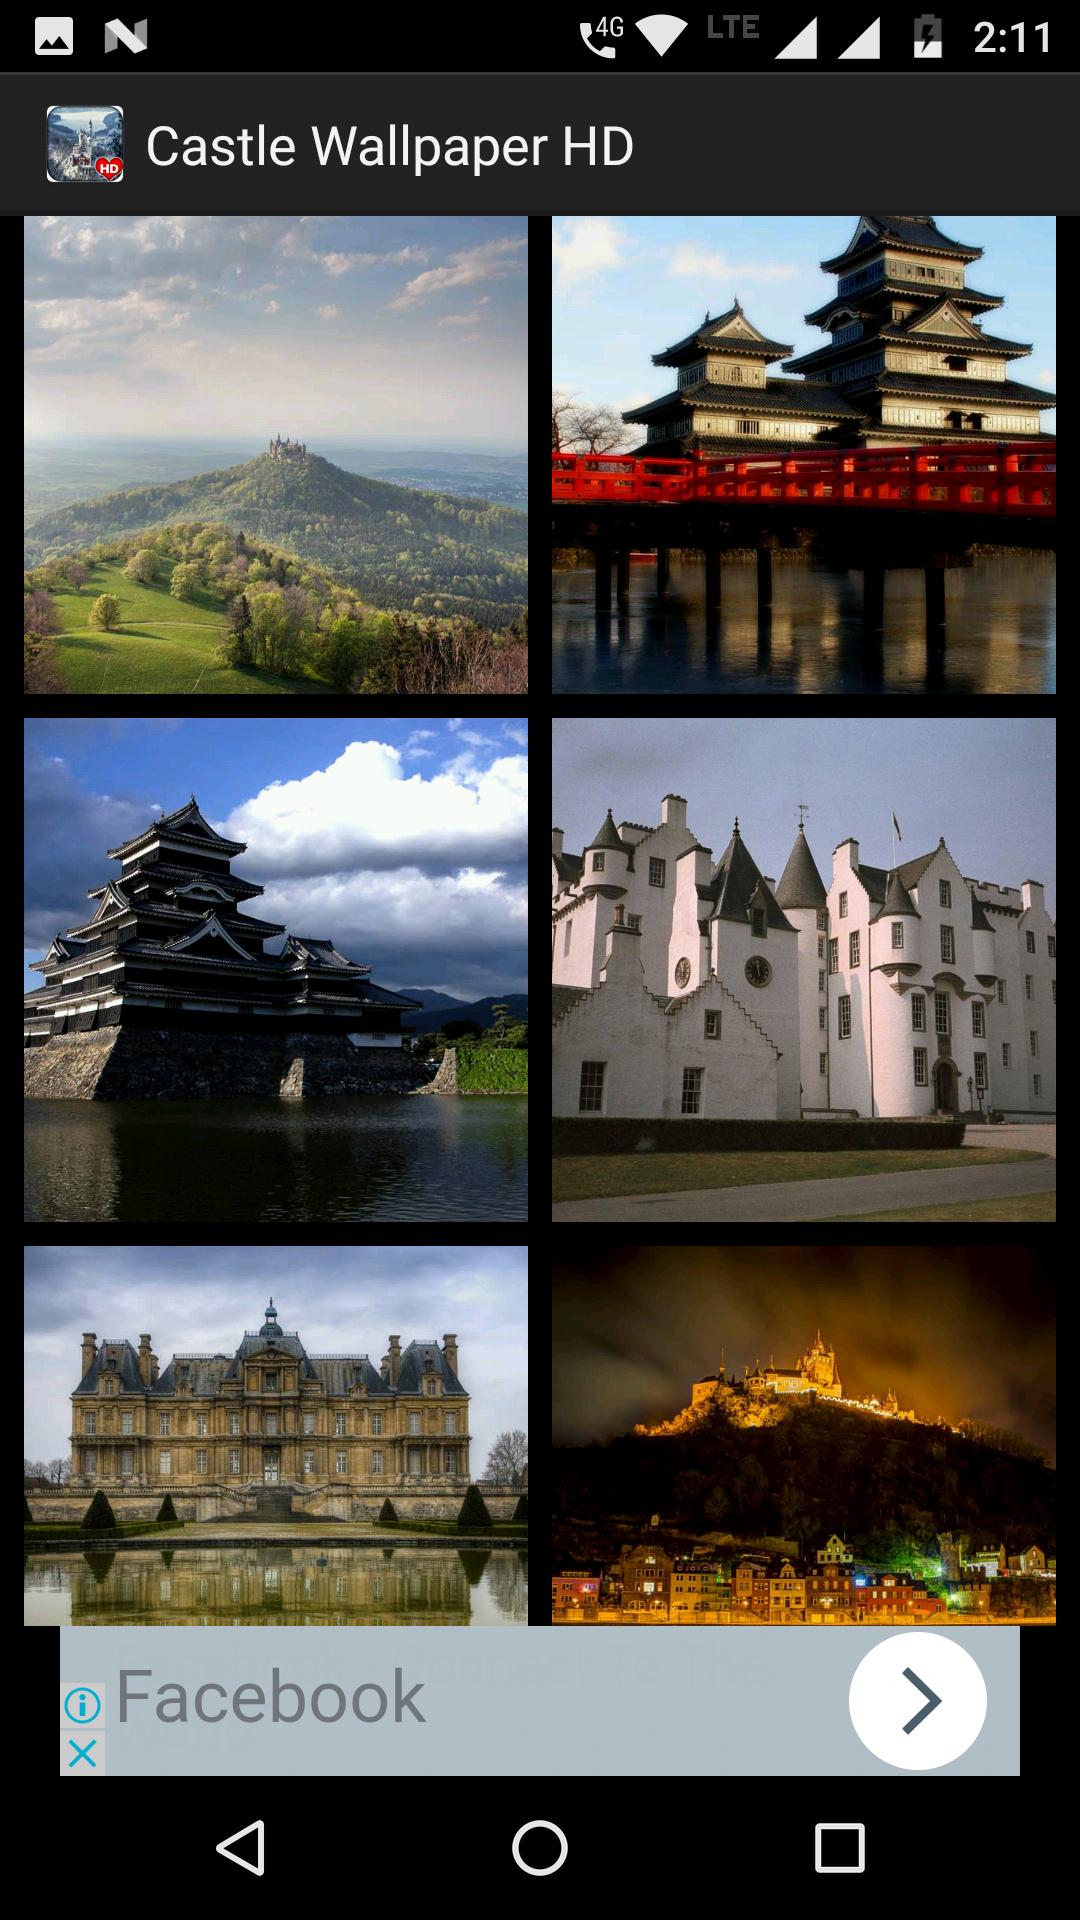 Castle Wallpaper Hd For Android Apk Download Images, Photos, Reviews